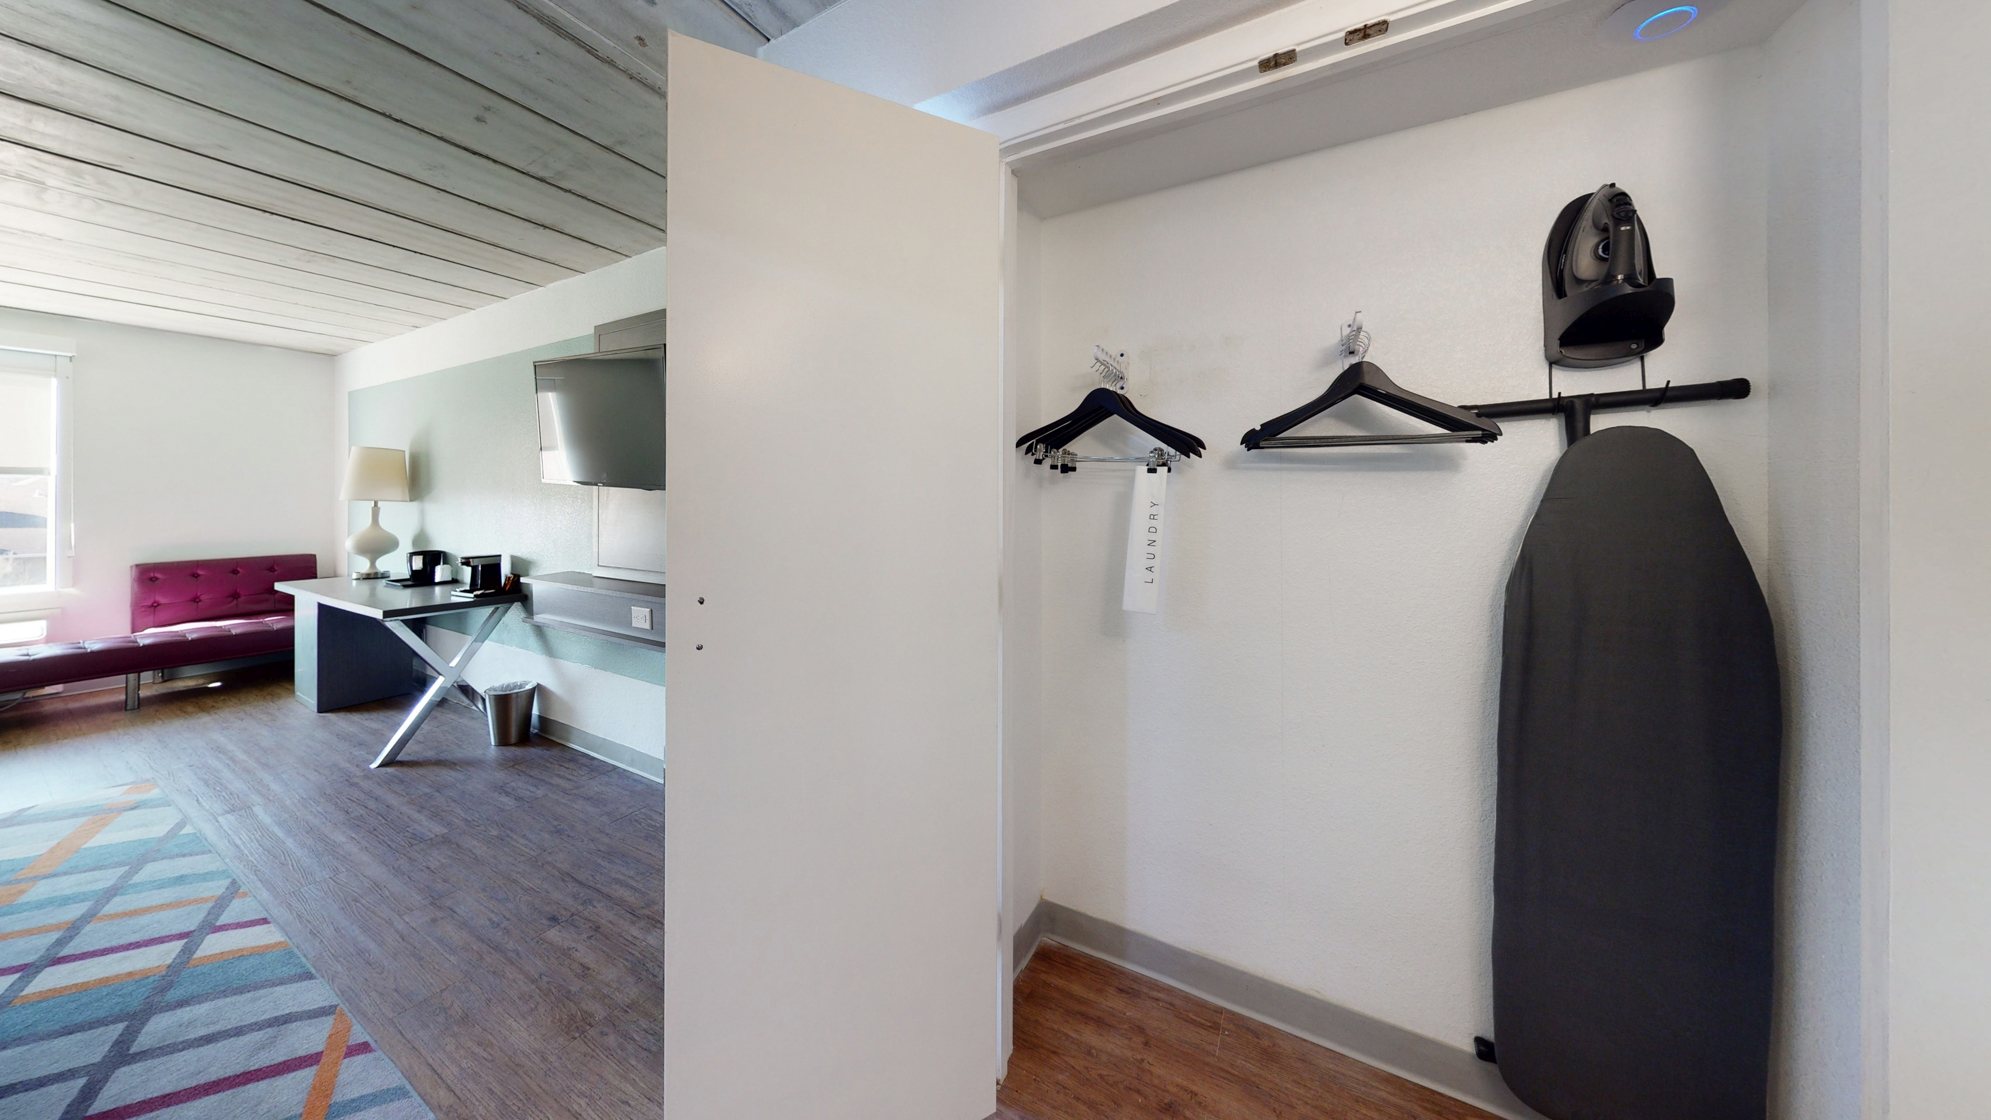 Open closet with Iron and Board along with hangers